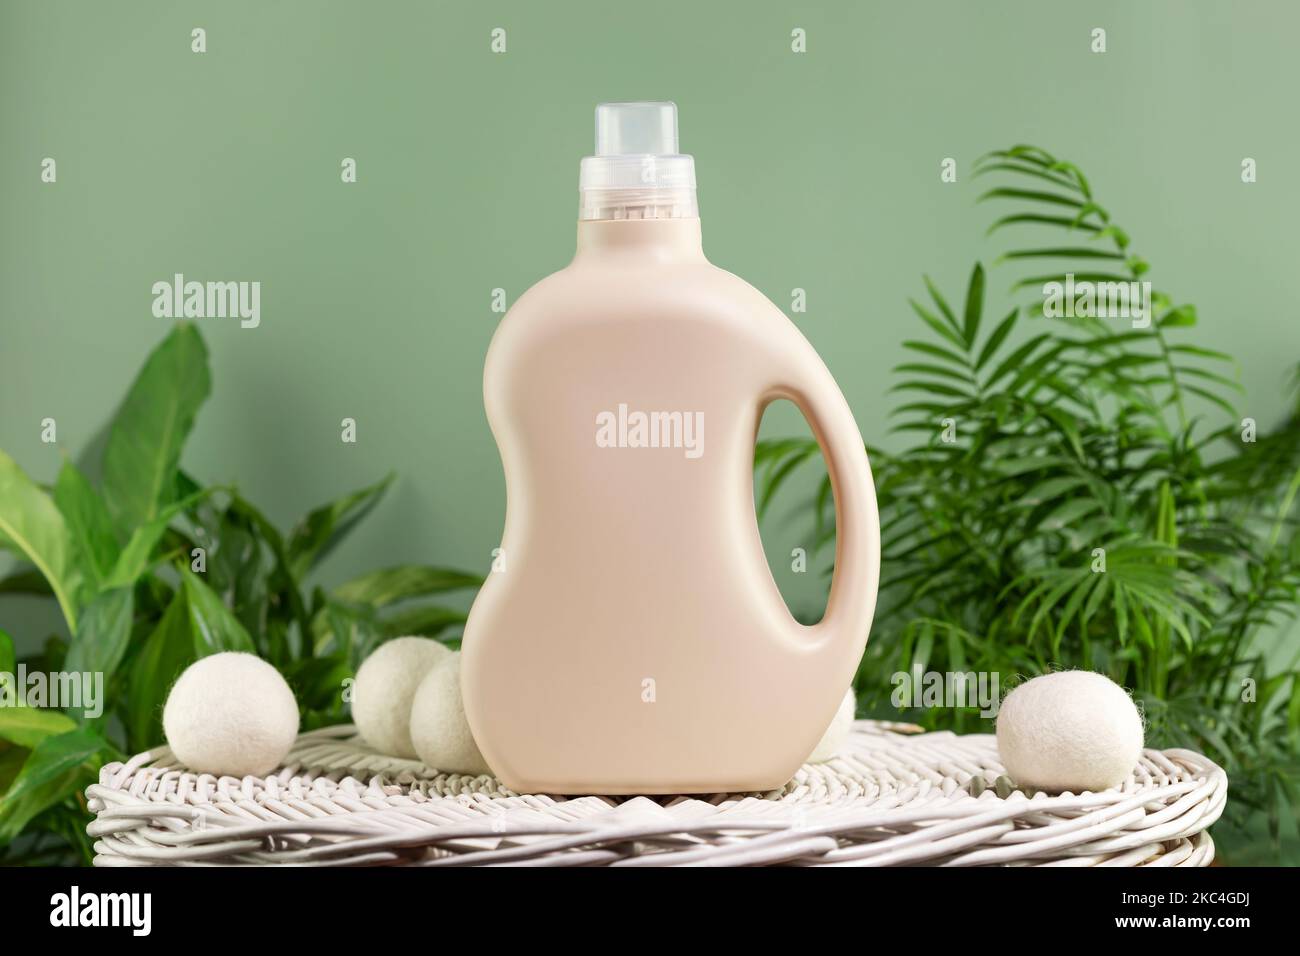 Natural laundry detergent mockup. Washing detergent concept with bottles of washing gel or fabric softener on a white laundry basket on a green backgr Stock Photo